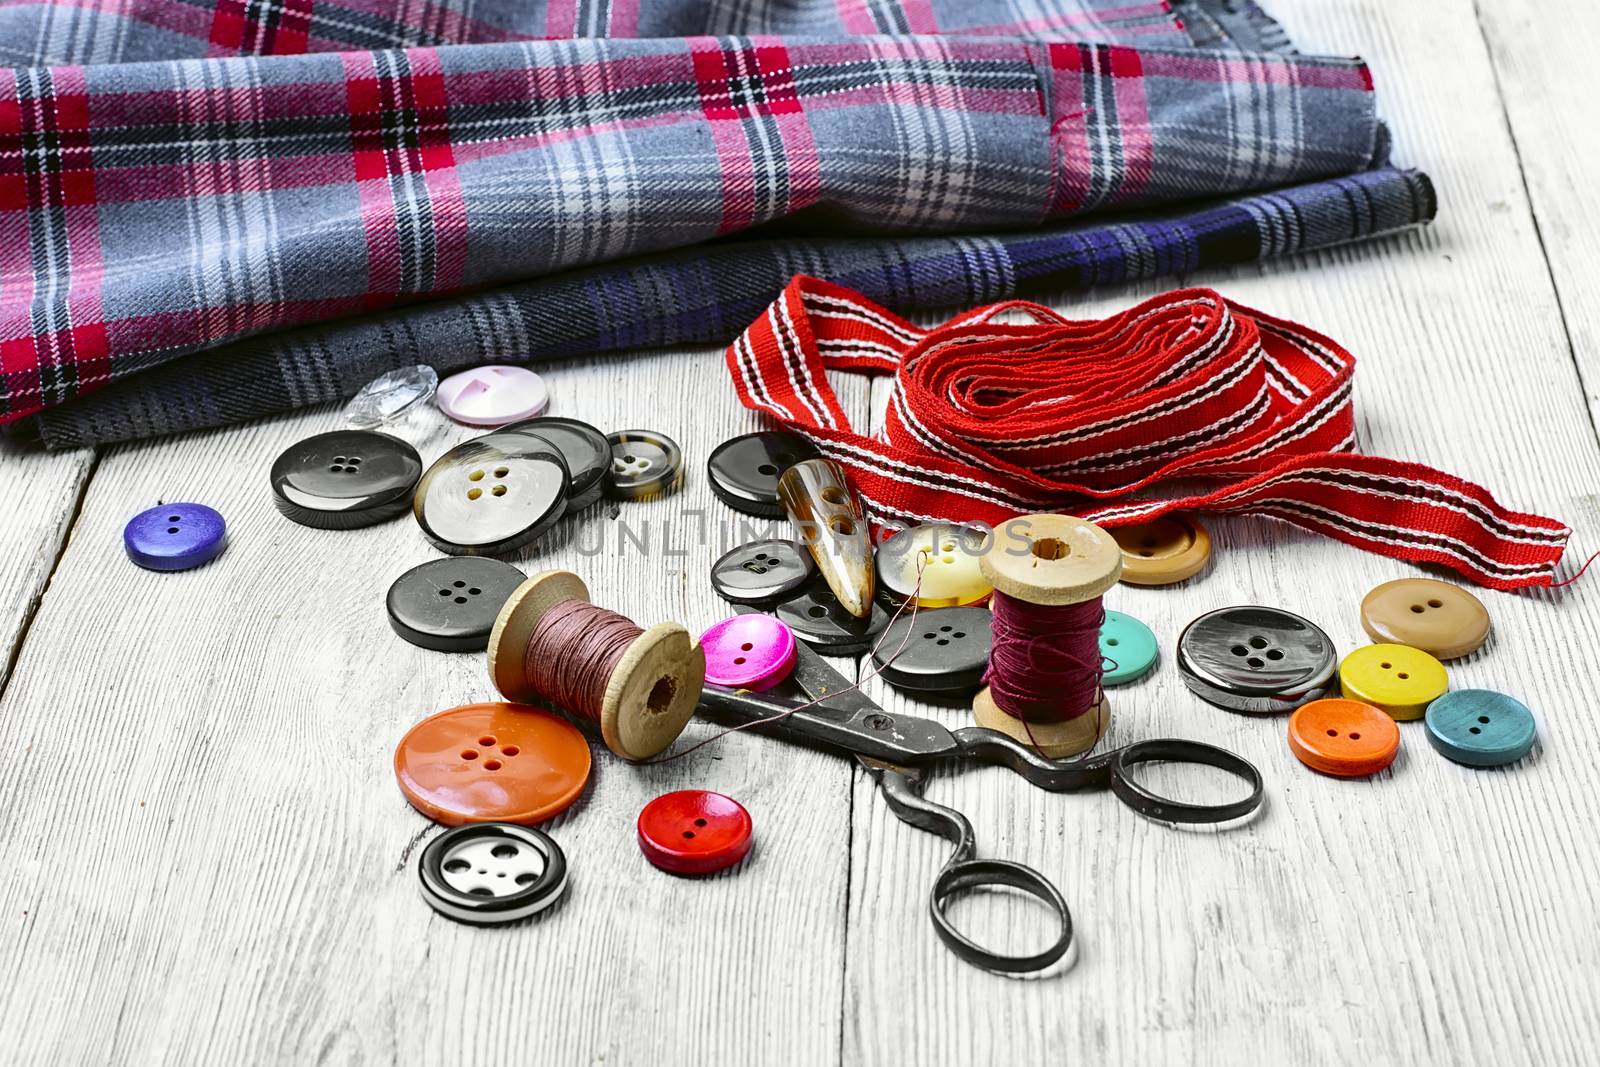 Tools for sewing and needlework by LMykola